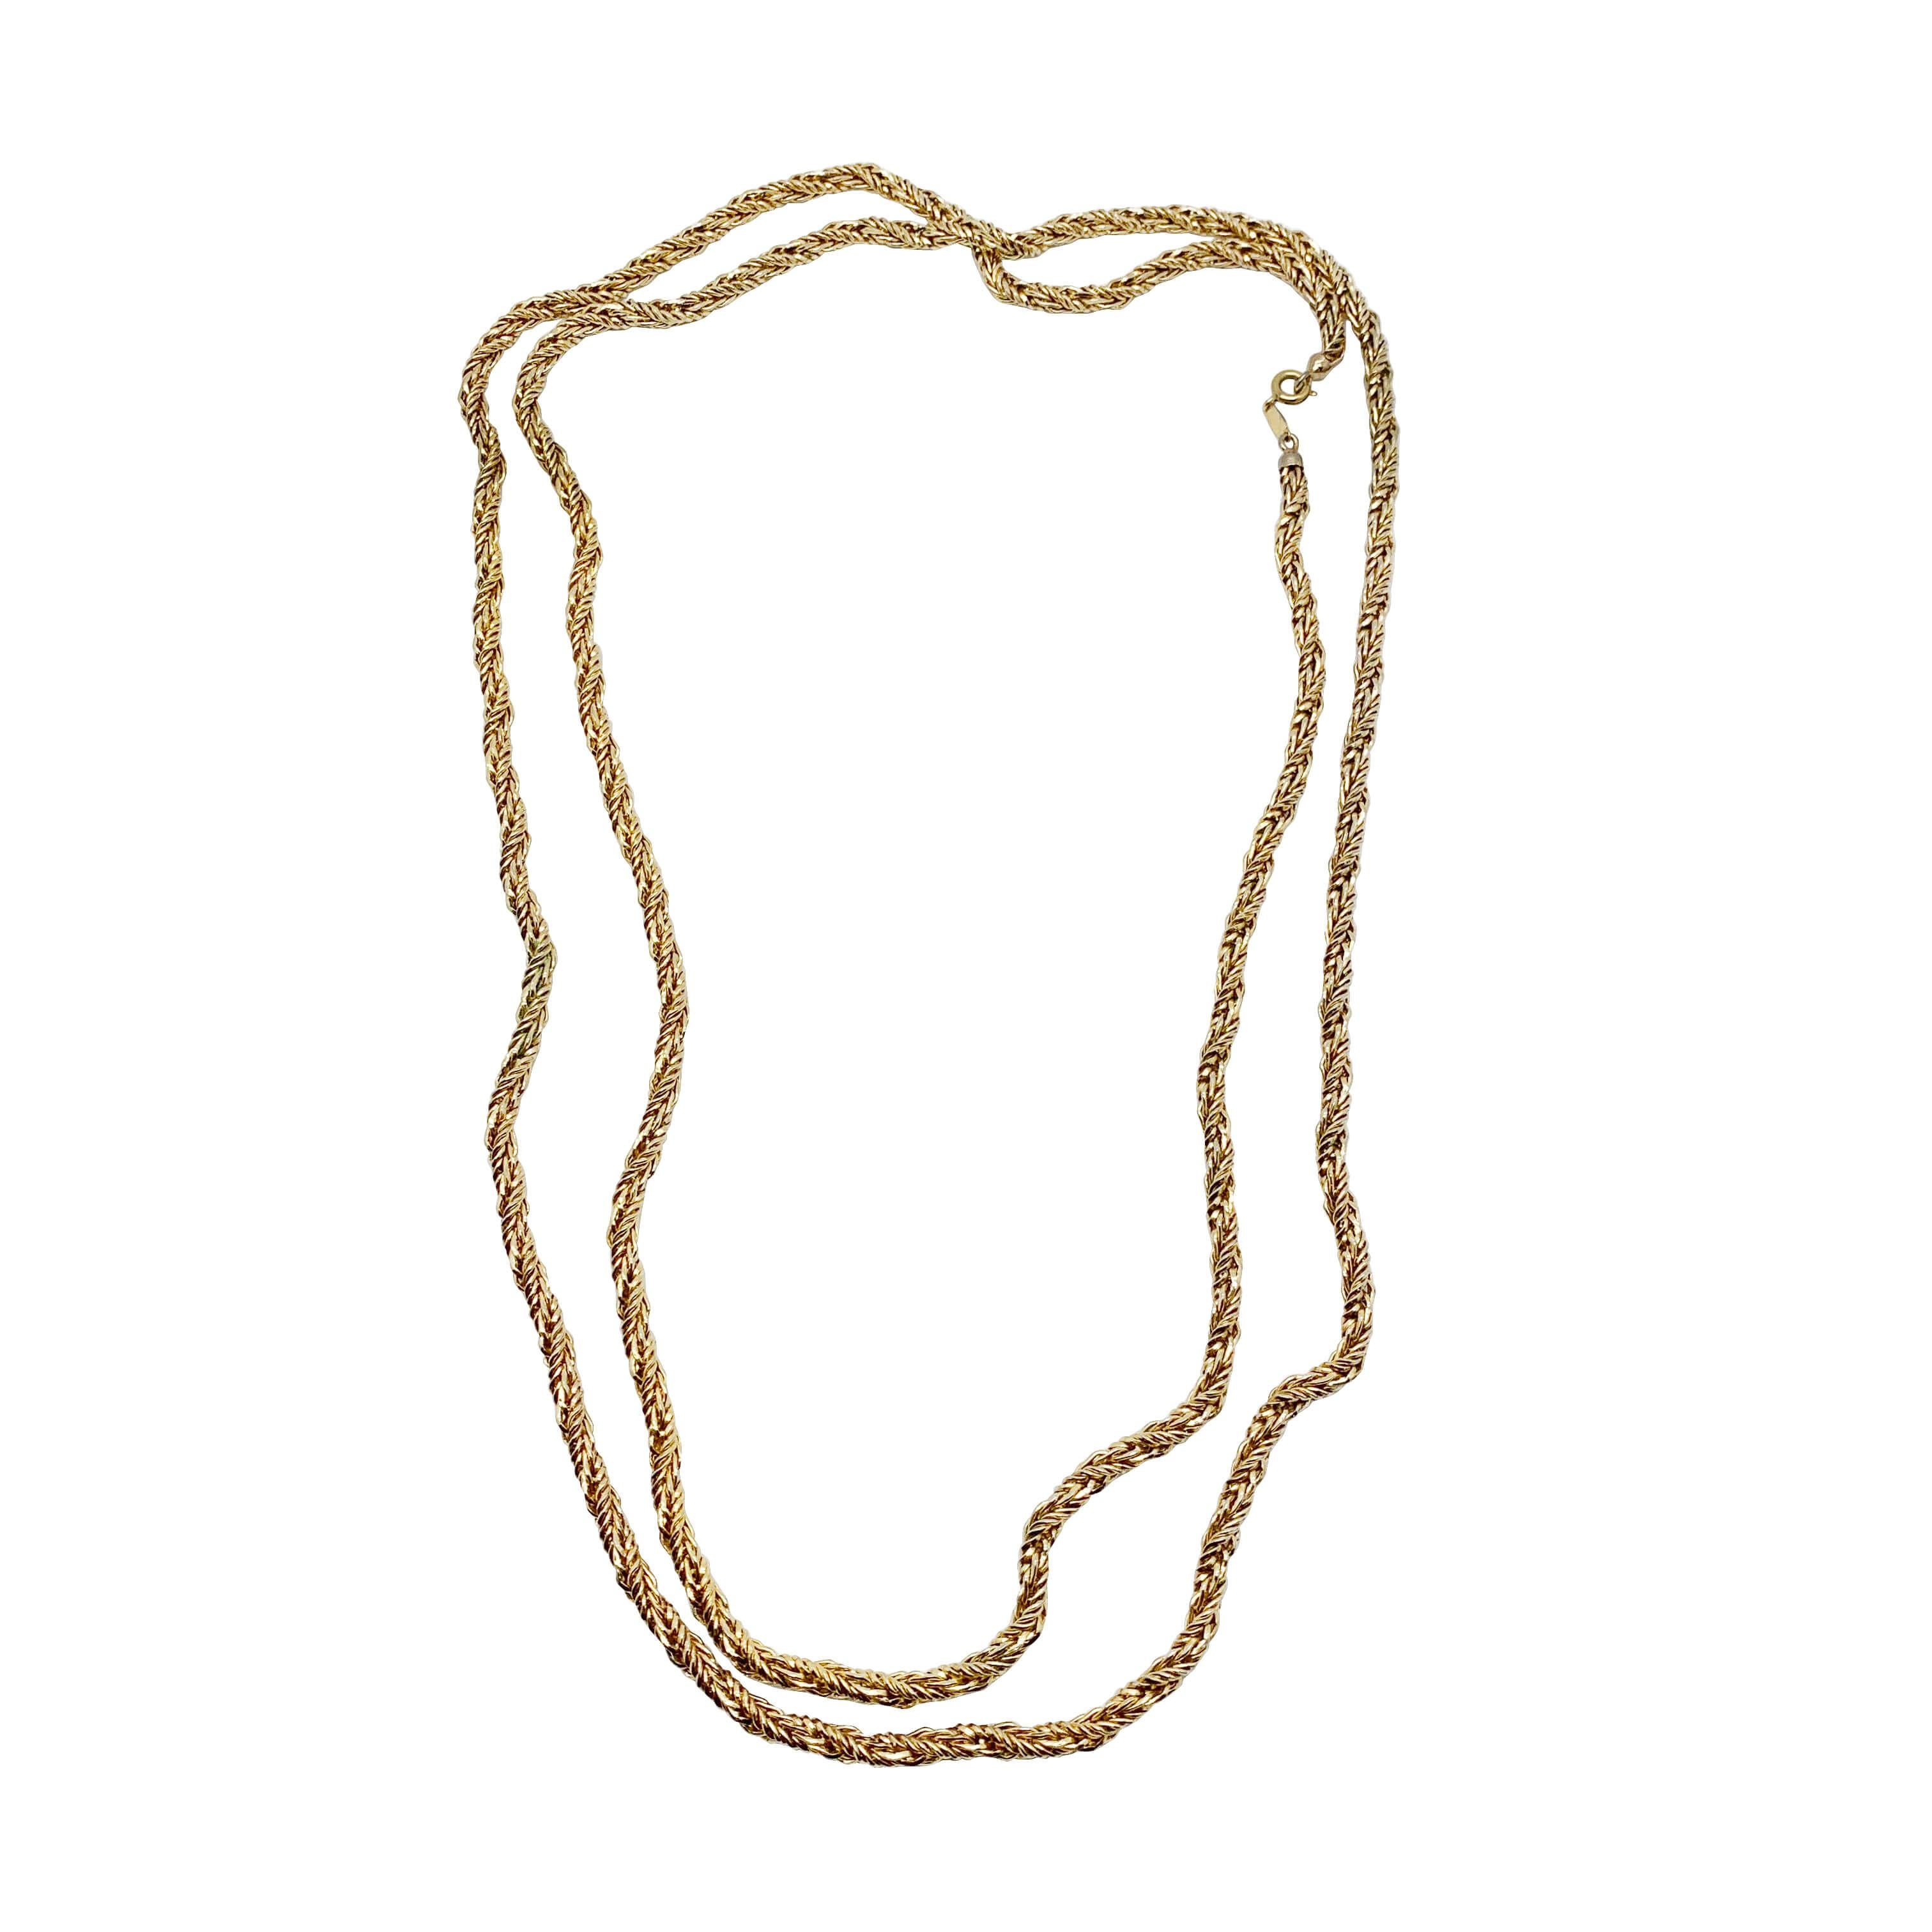 A lavishly long Vintage Dior herringbone chain. From the House of Christian Dior in 1968. During particular periods the House of Dior signed a date on their costume jewellery pieces allowing these pieces to be attributed to a particular year in the